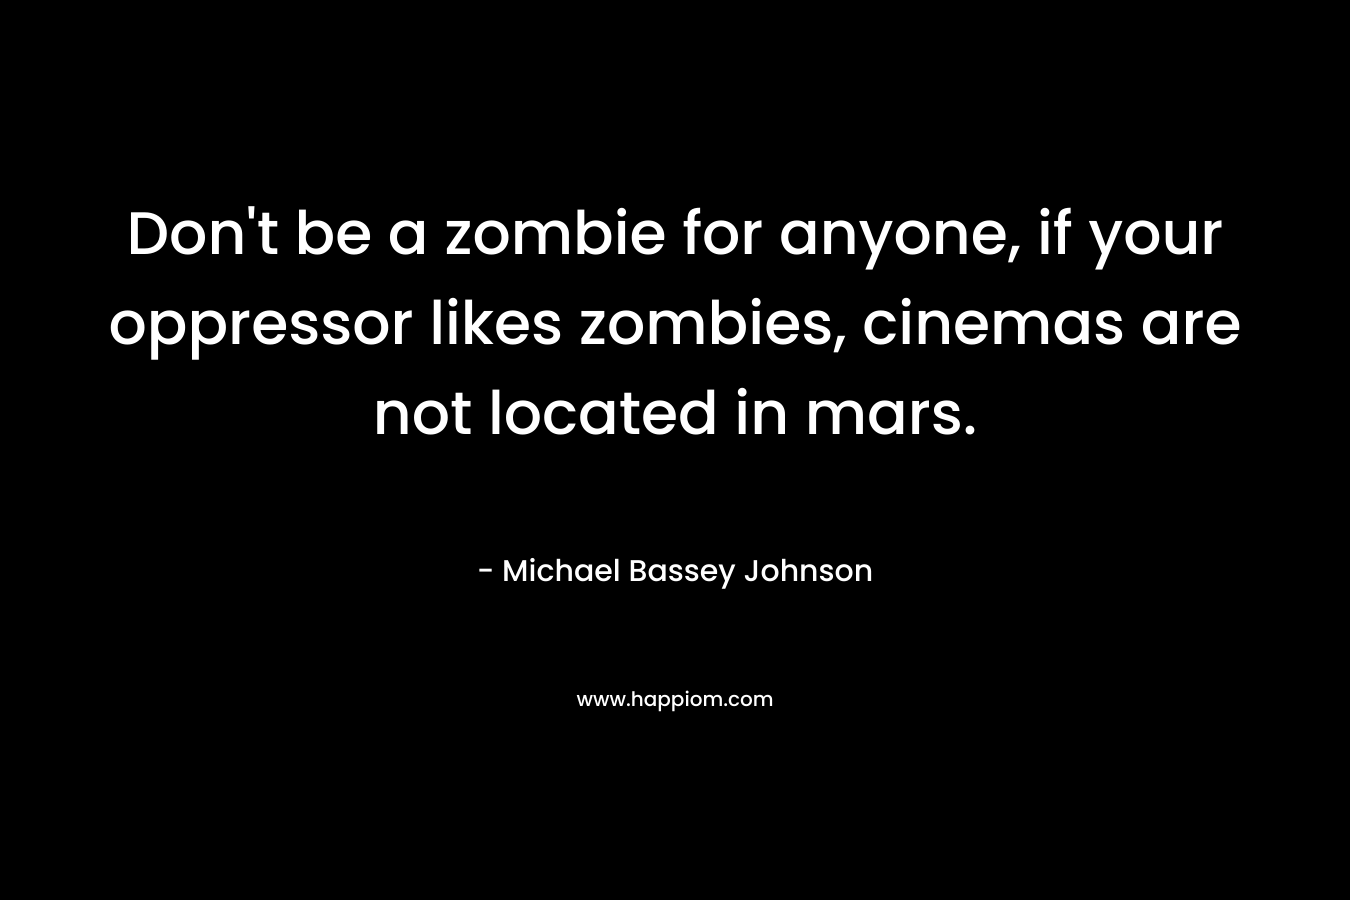 Don’t be a zombie for anyone, if your oppressor likes zombies, cinemas are not located in mars. – Michael Bassey Johnson